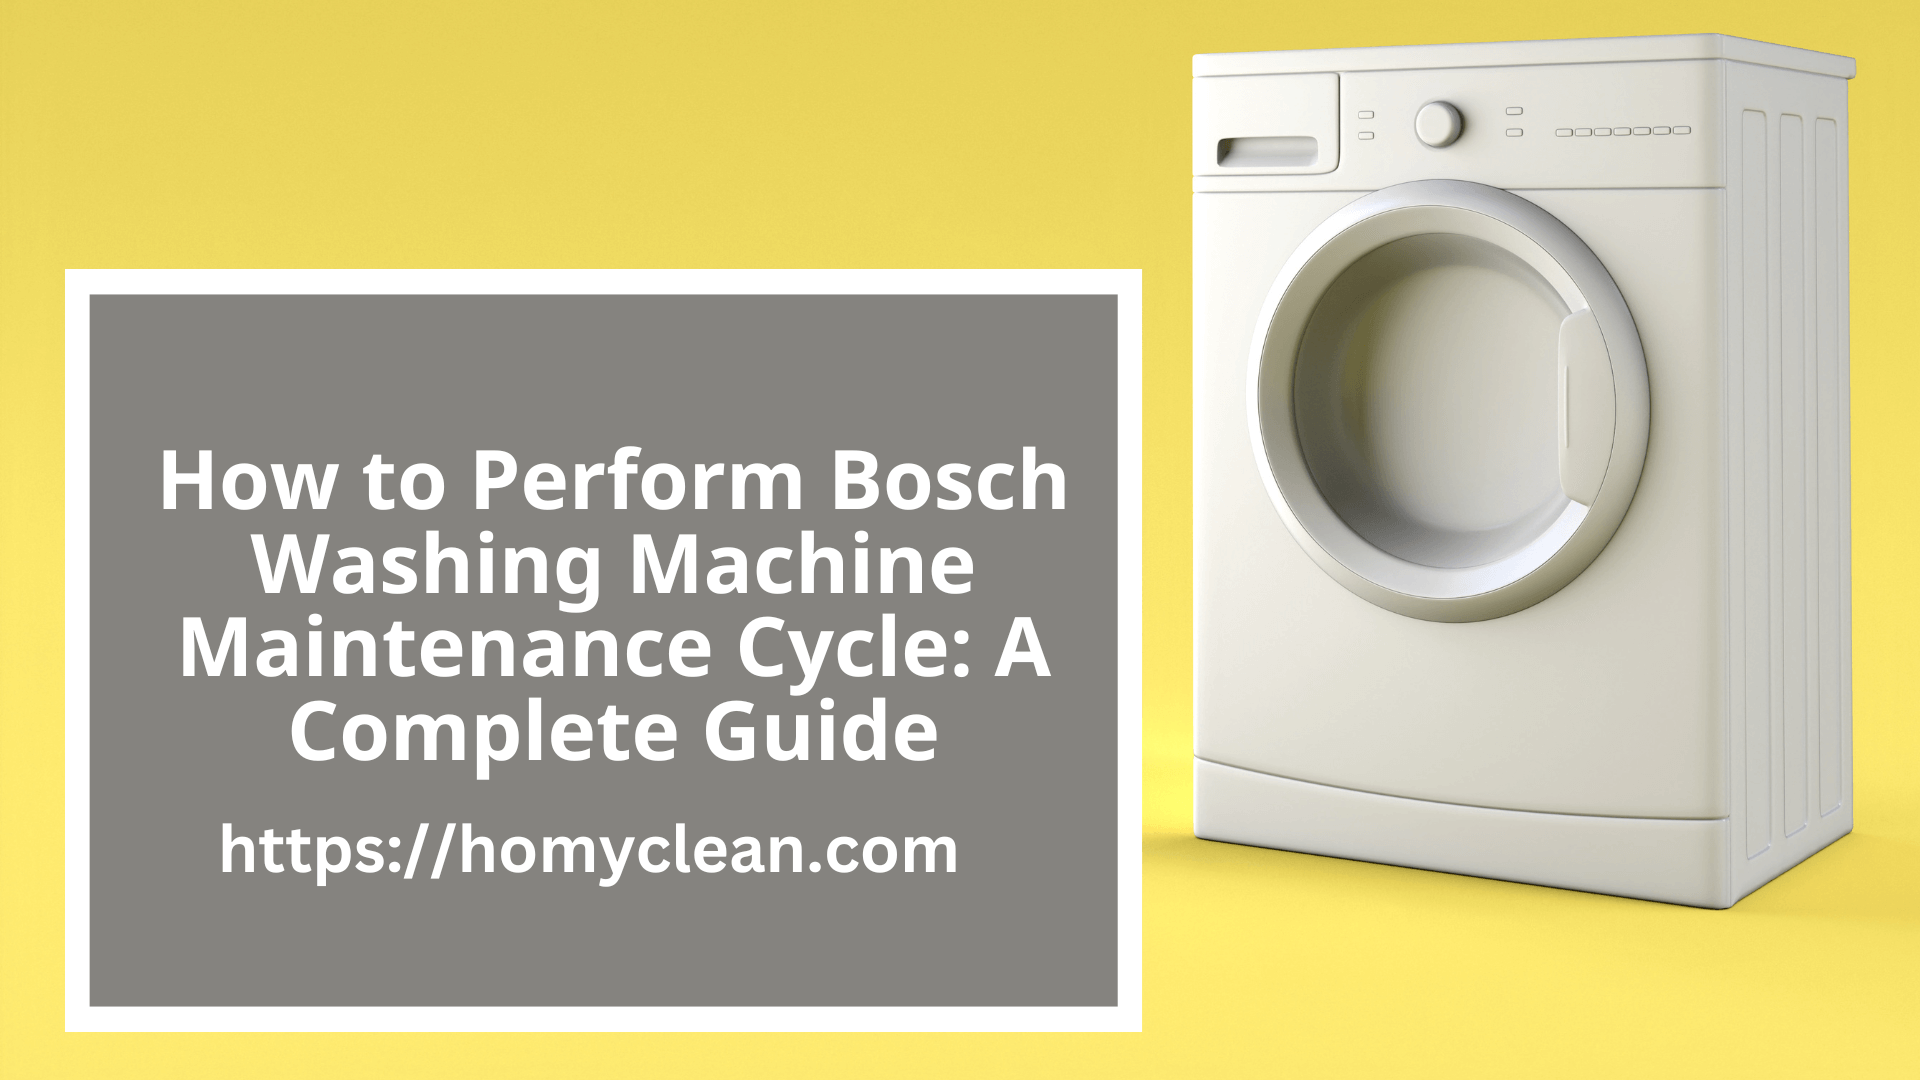 How to Perform Bosch Washing Machine Maintenance Cycle: A Complete Guide